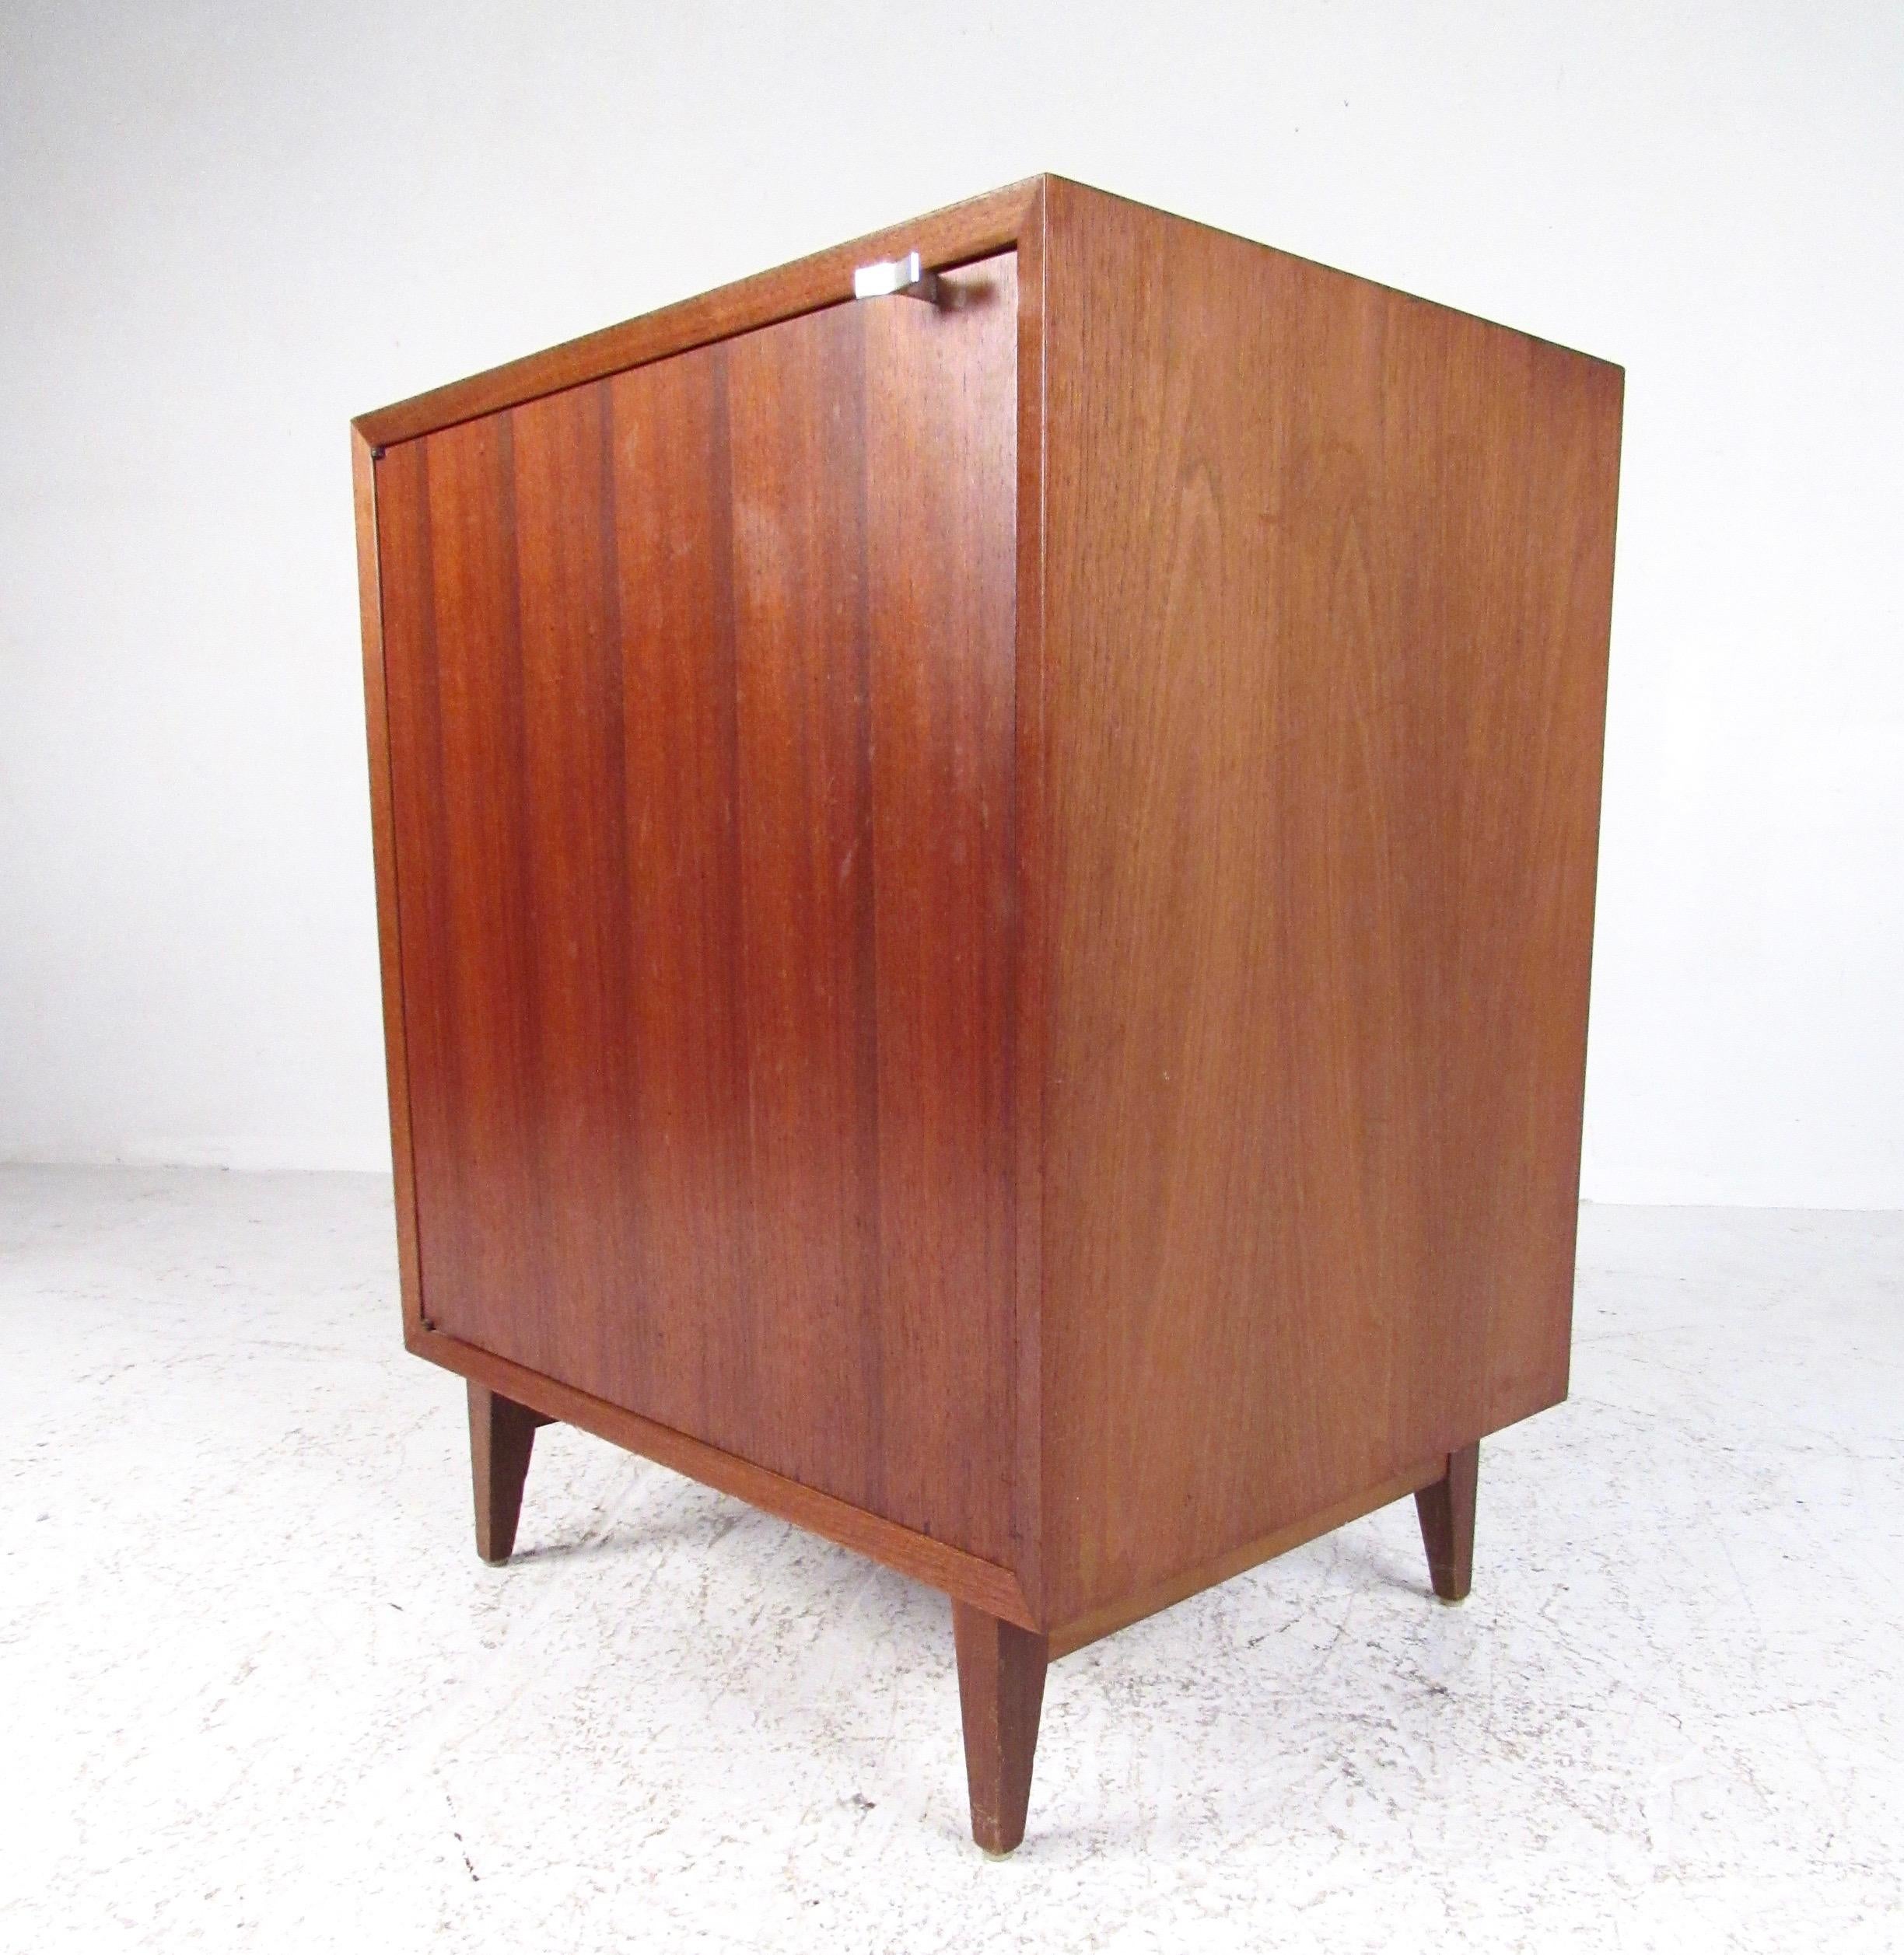 This striking Mid-Century Modern cabinet features the quality vintage design of George Nelson for Herman Miller. Rich walnut wood tone and iconic George Nelson designed chrome handle add to the simple yet elegant mid-century appeal of the piece.